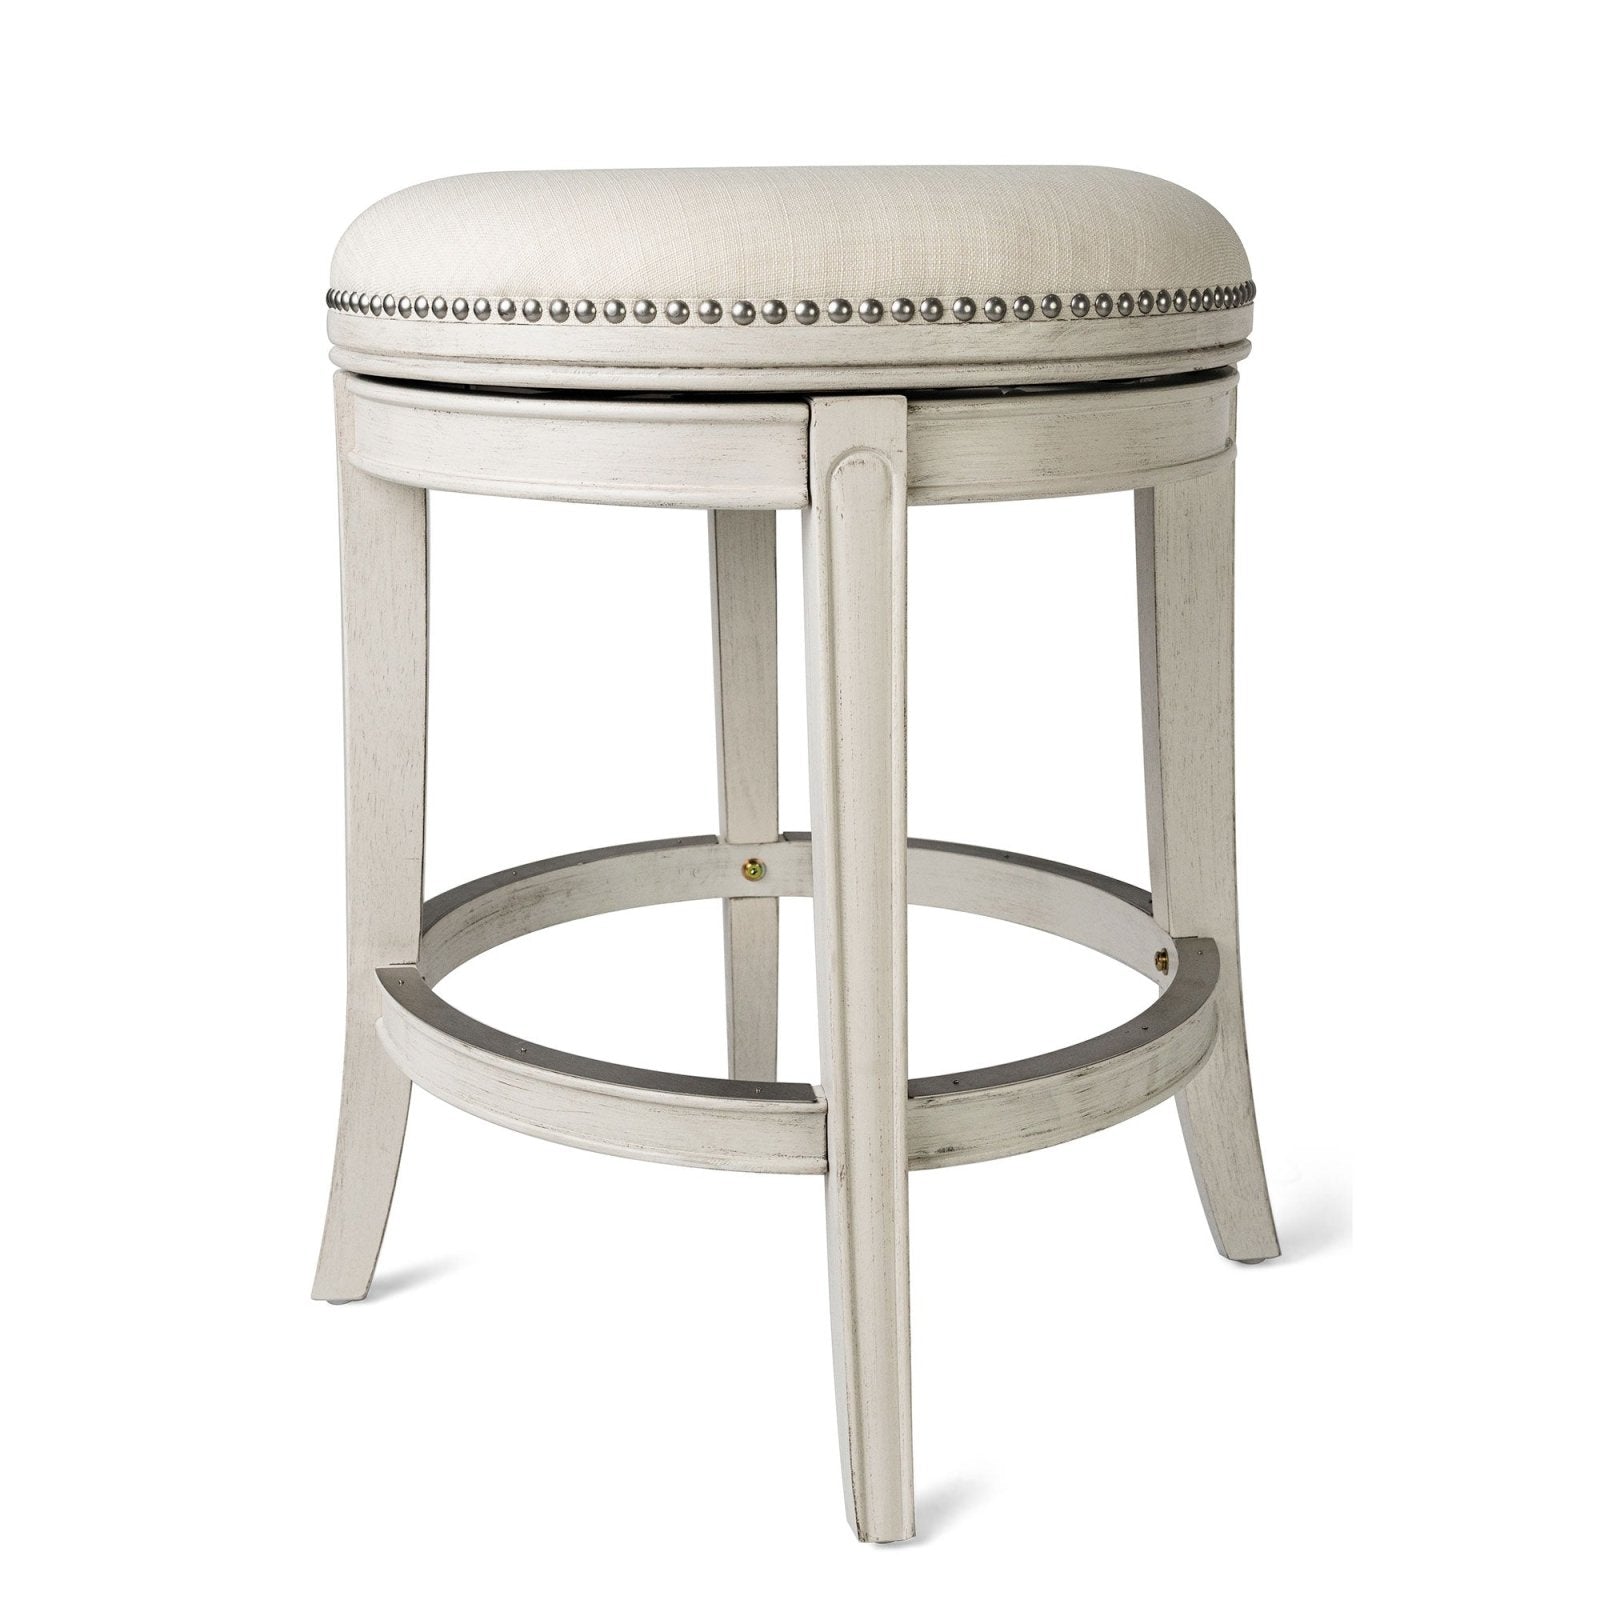 Alexander Backless Counter Stool in White Oak Finish w/ Natural Color Fabric Upholstery